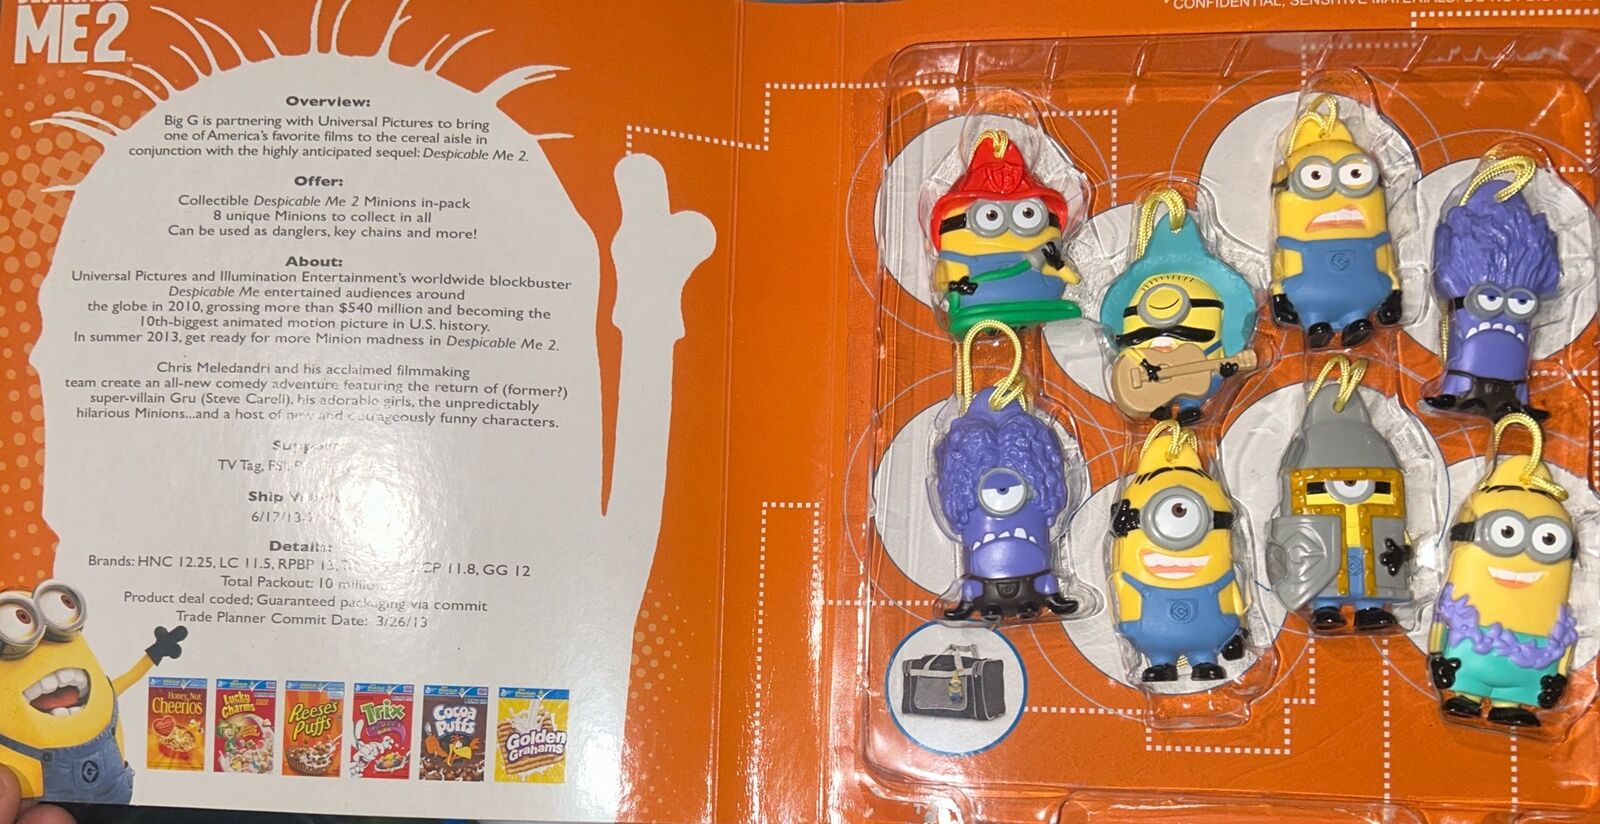 Rare Despicable Me 2 Backpack Danglers Toys General Mills Promotional Press Kit